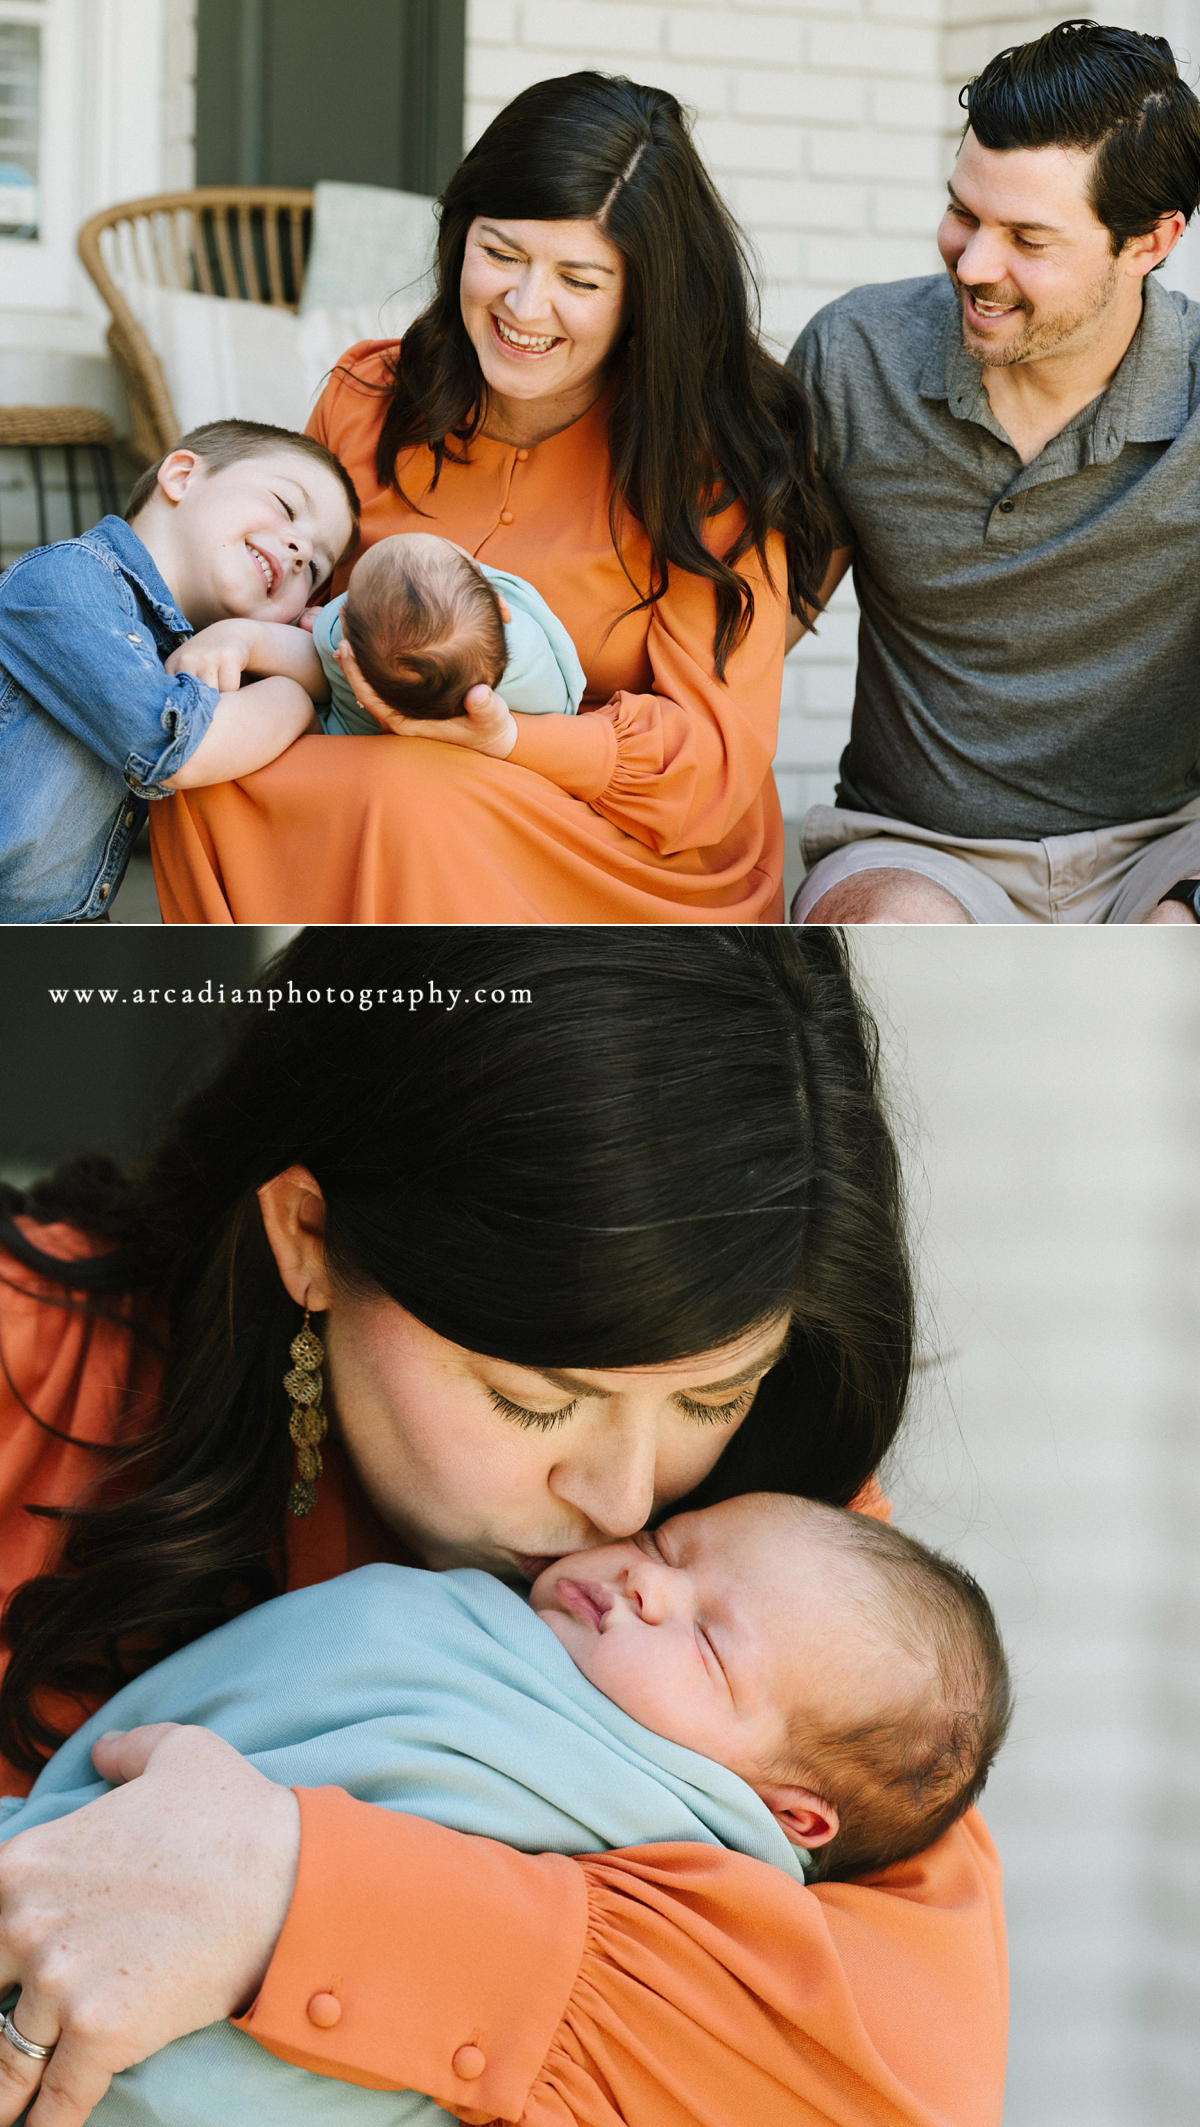 Front porch, socially distanced, newborn session in Oregon